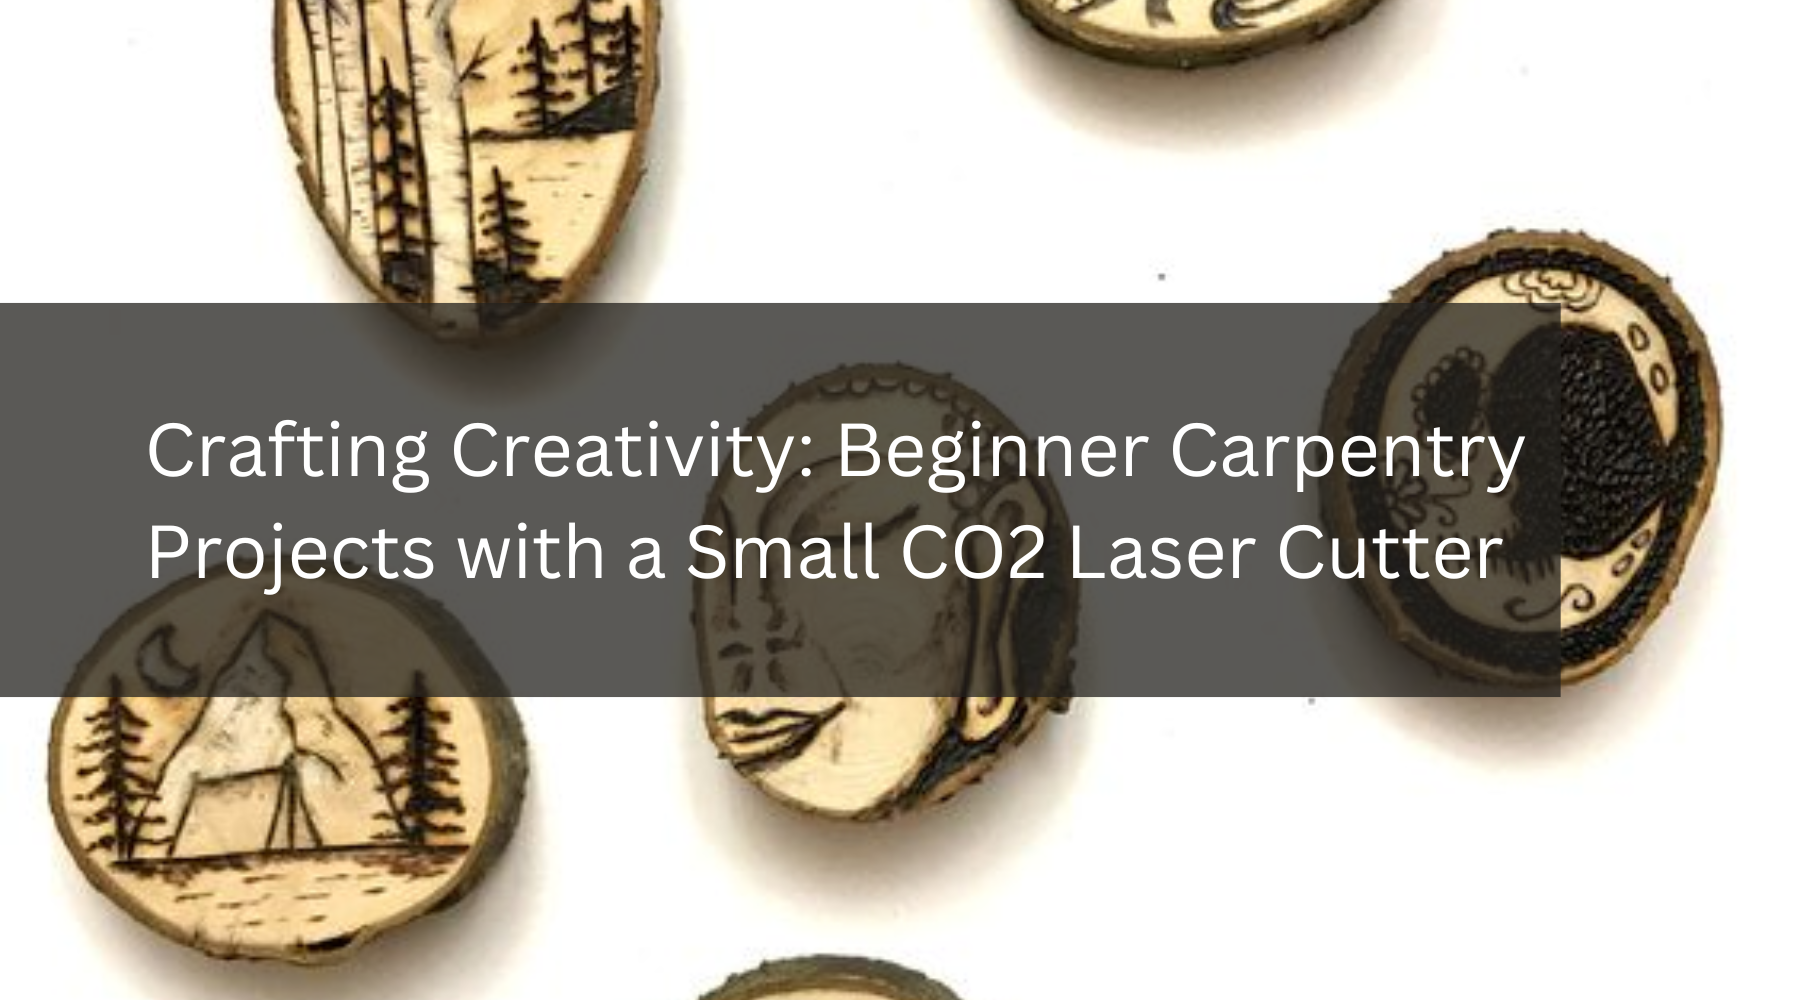 Crafting Creativity: Beginner Carpentry Projects with a Small CO2 Laser Cutter